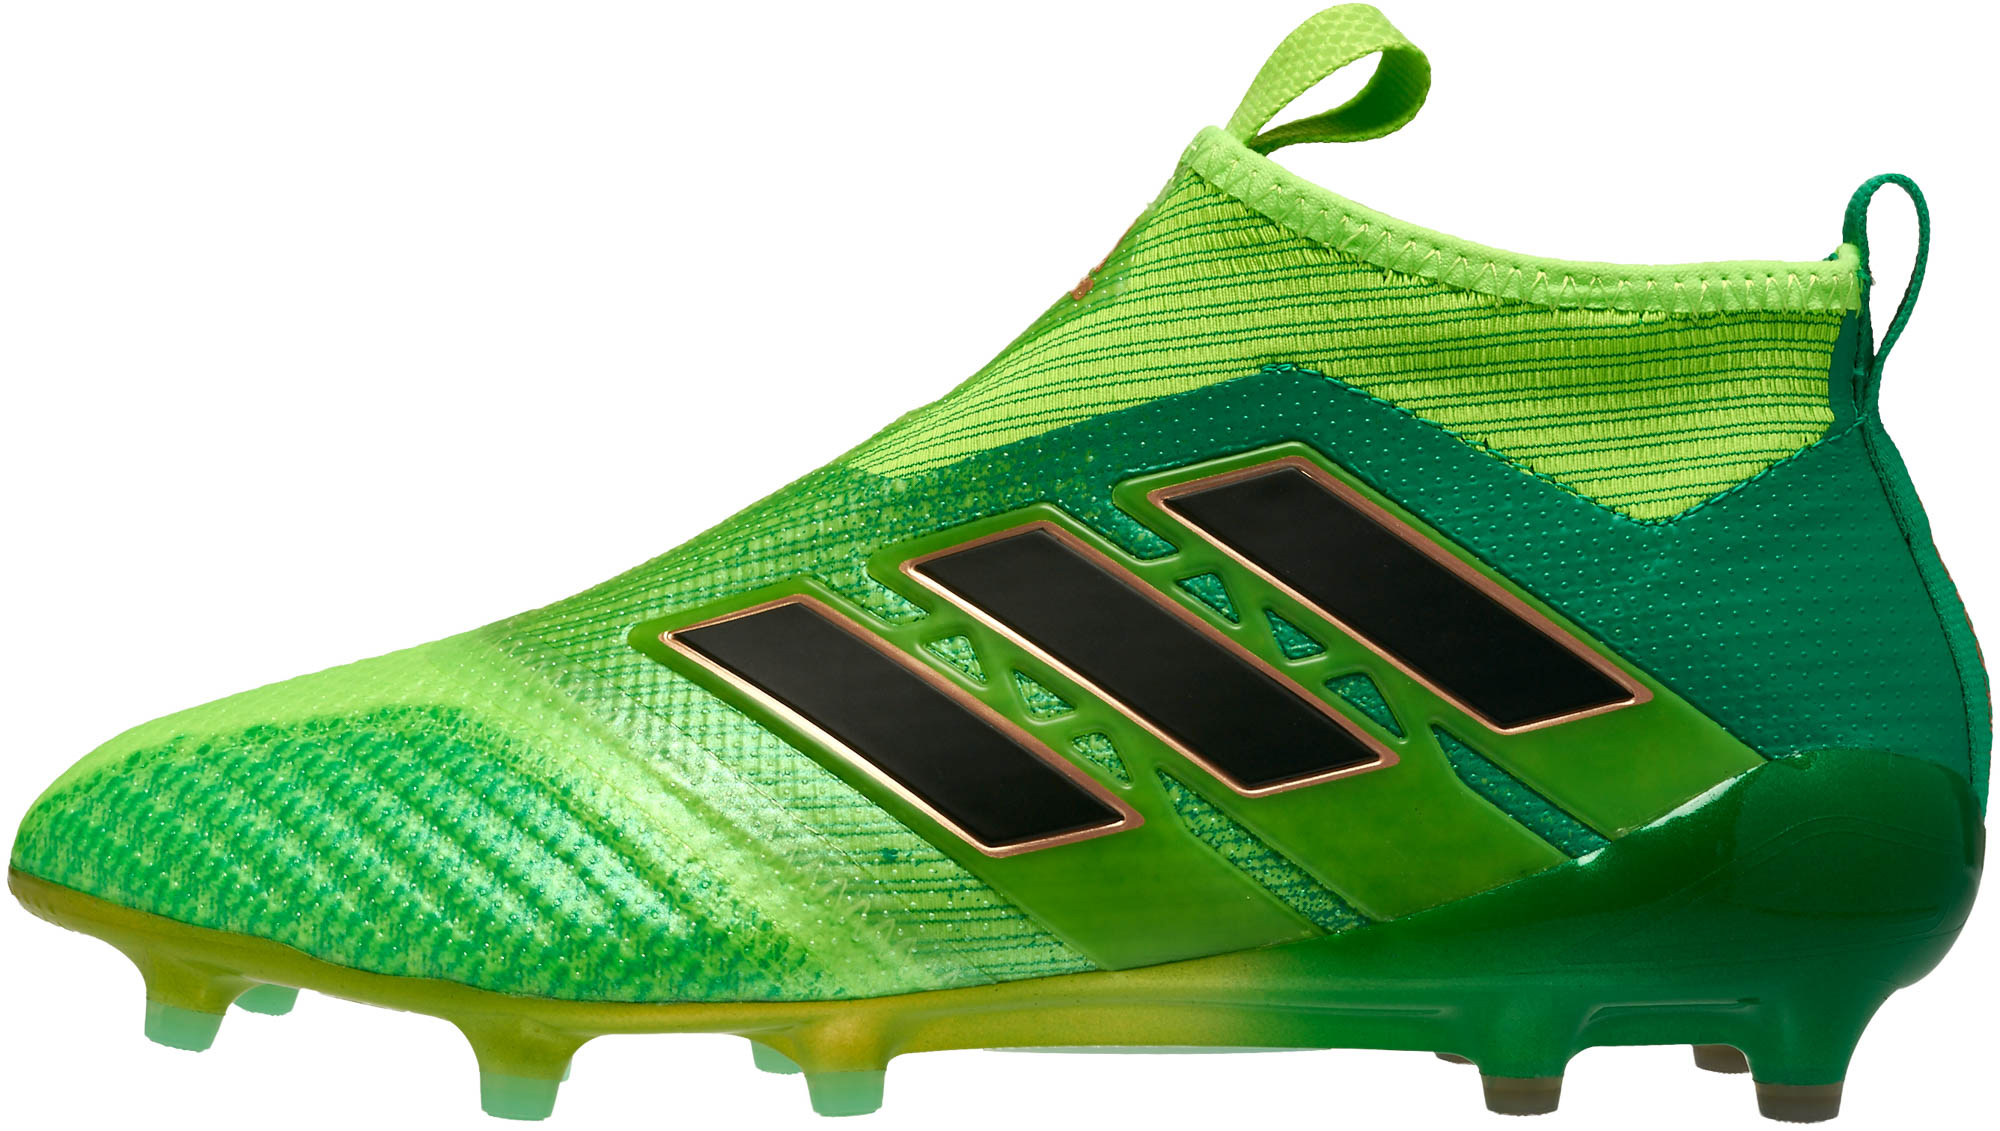 adidas 17 Purecontrol - Soccer Cleats